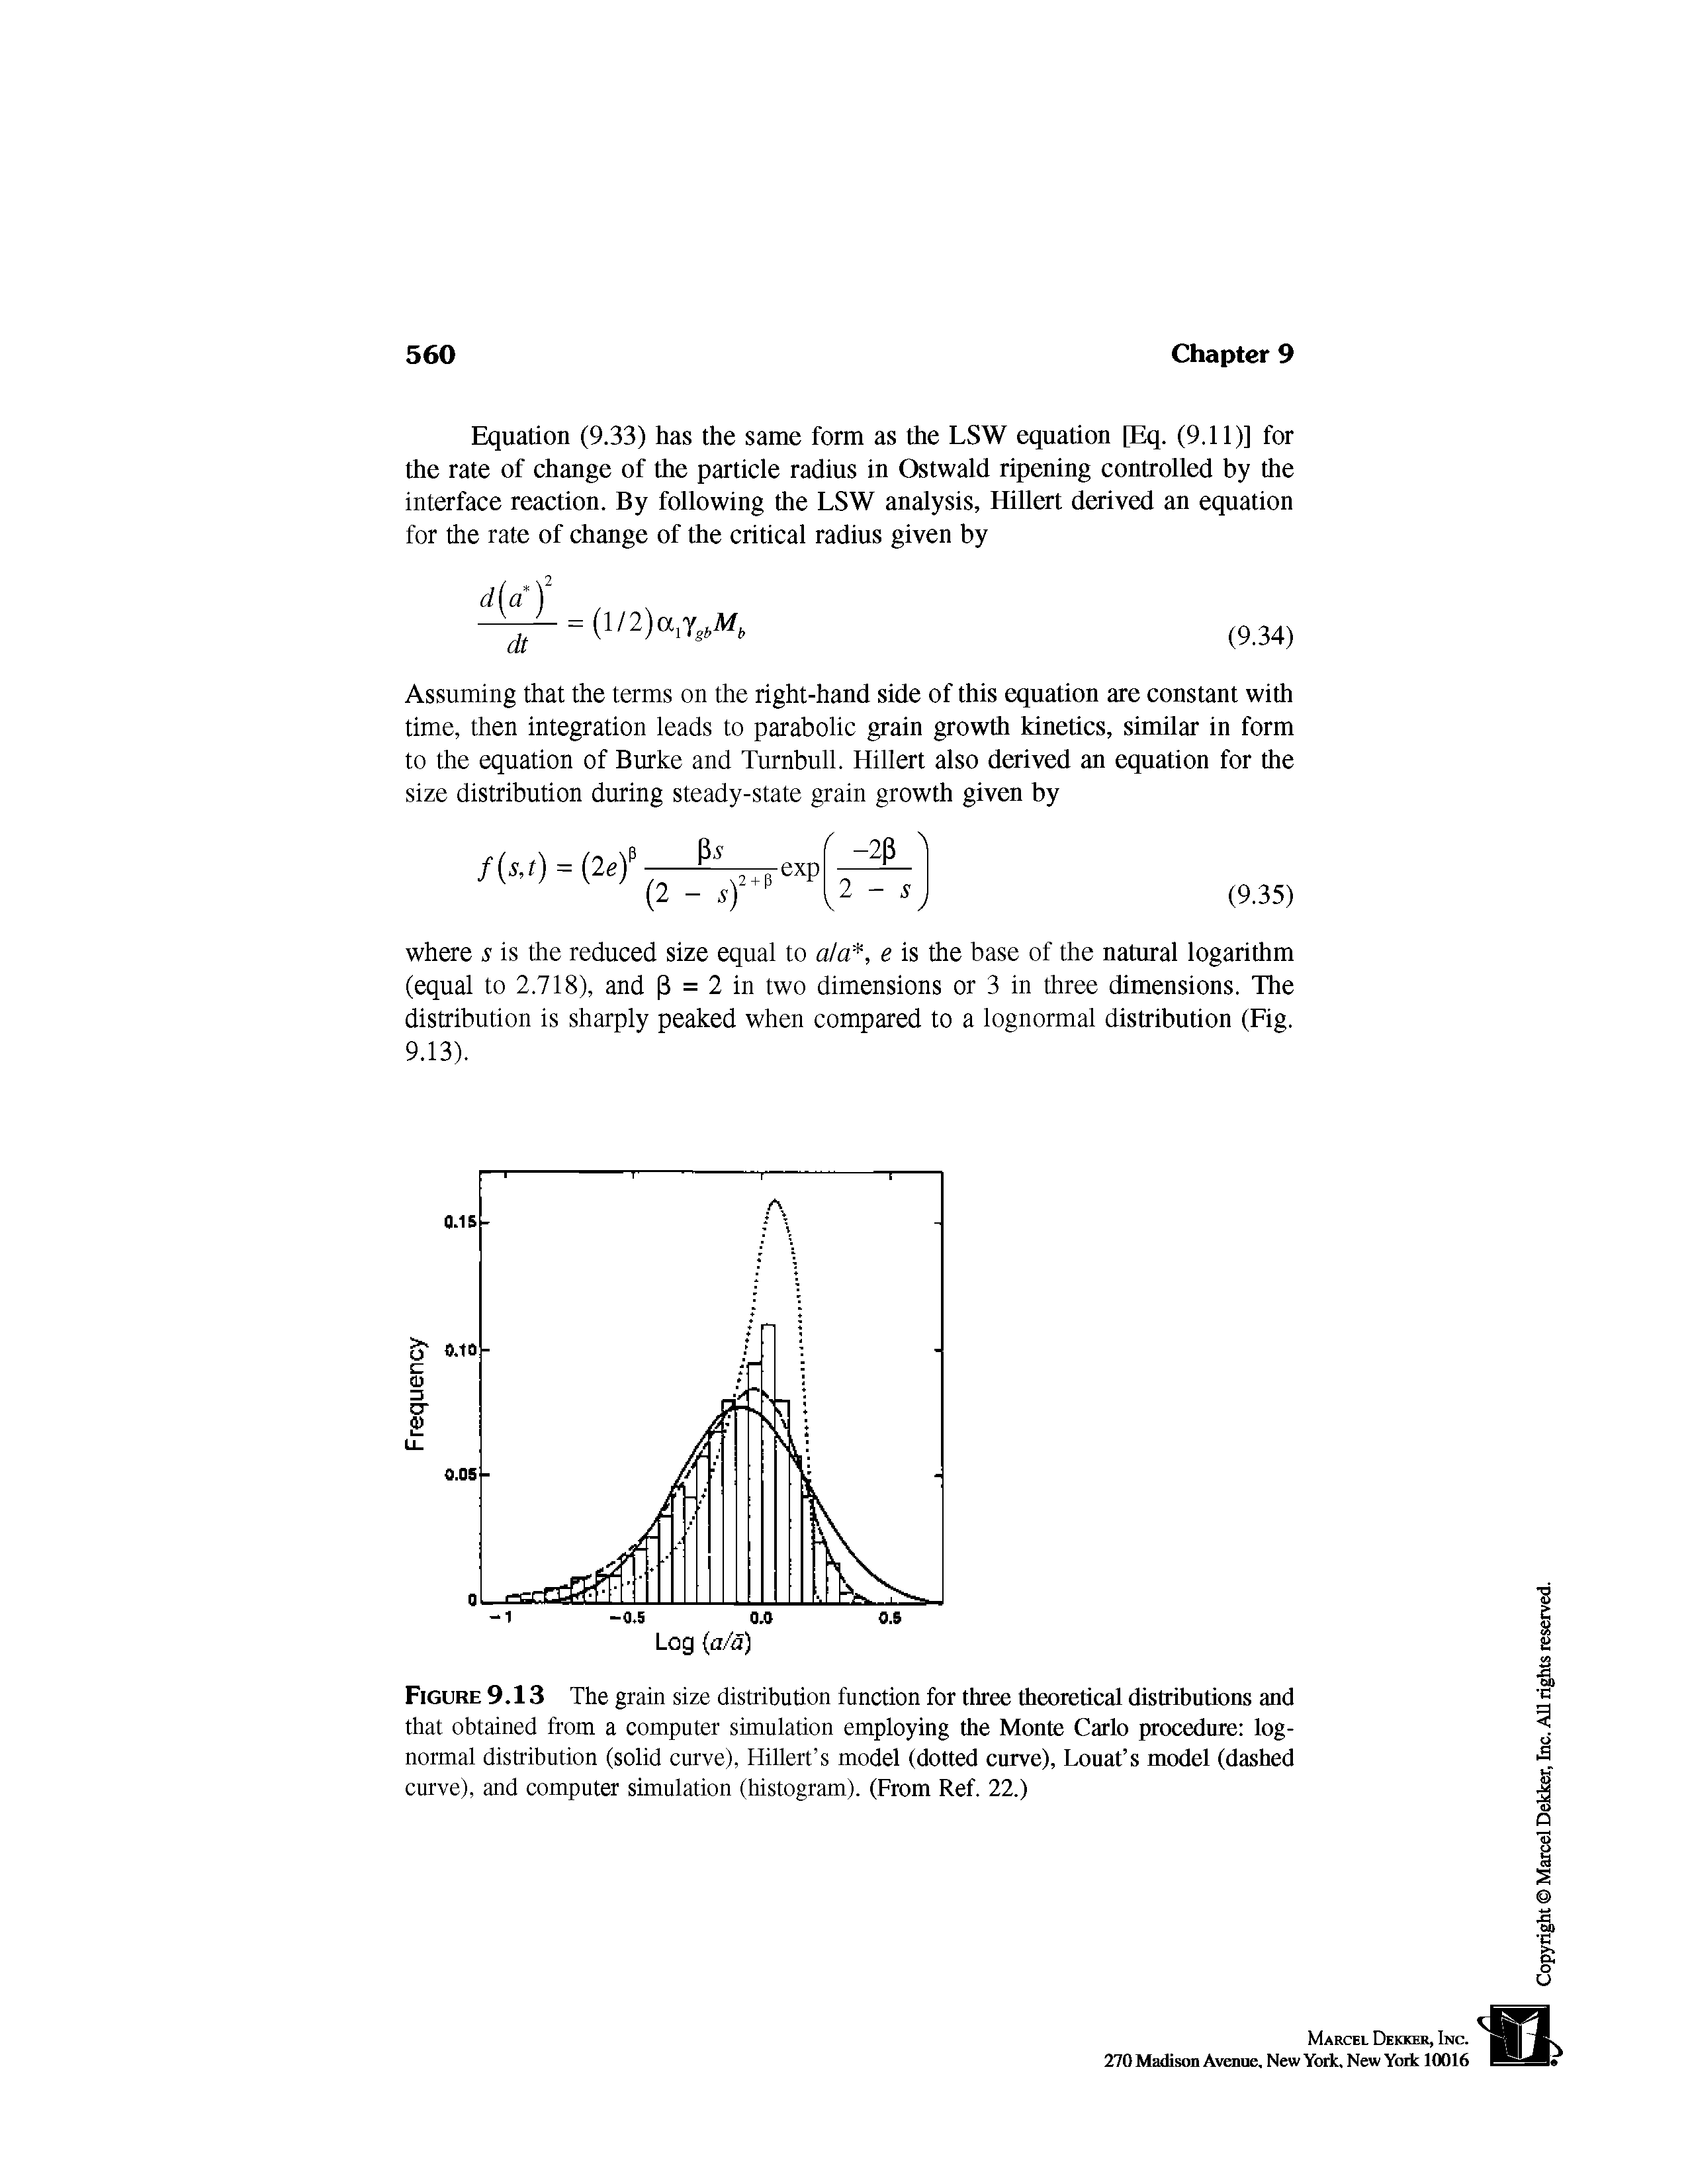 Figure 9.13 The grain size distribution function for three theoretical distributions and that obtained from a computer simulation employing the Monte Carlo procedure lognormal distribution (solid curve), Hillert s model (dotted curve), Louat s model (dashed curve), and computer simulation (histogram). (From Ref. 22.)...